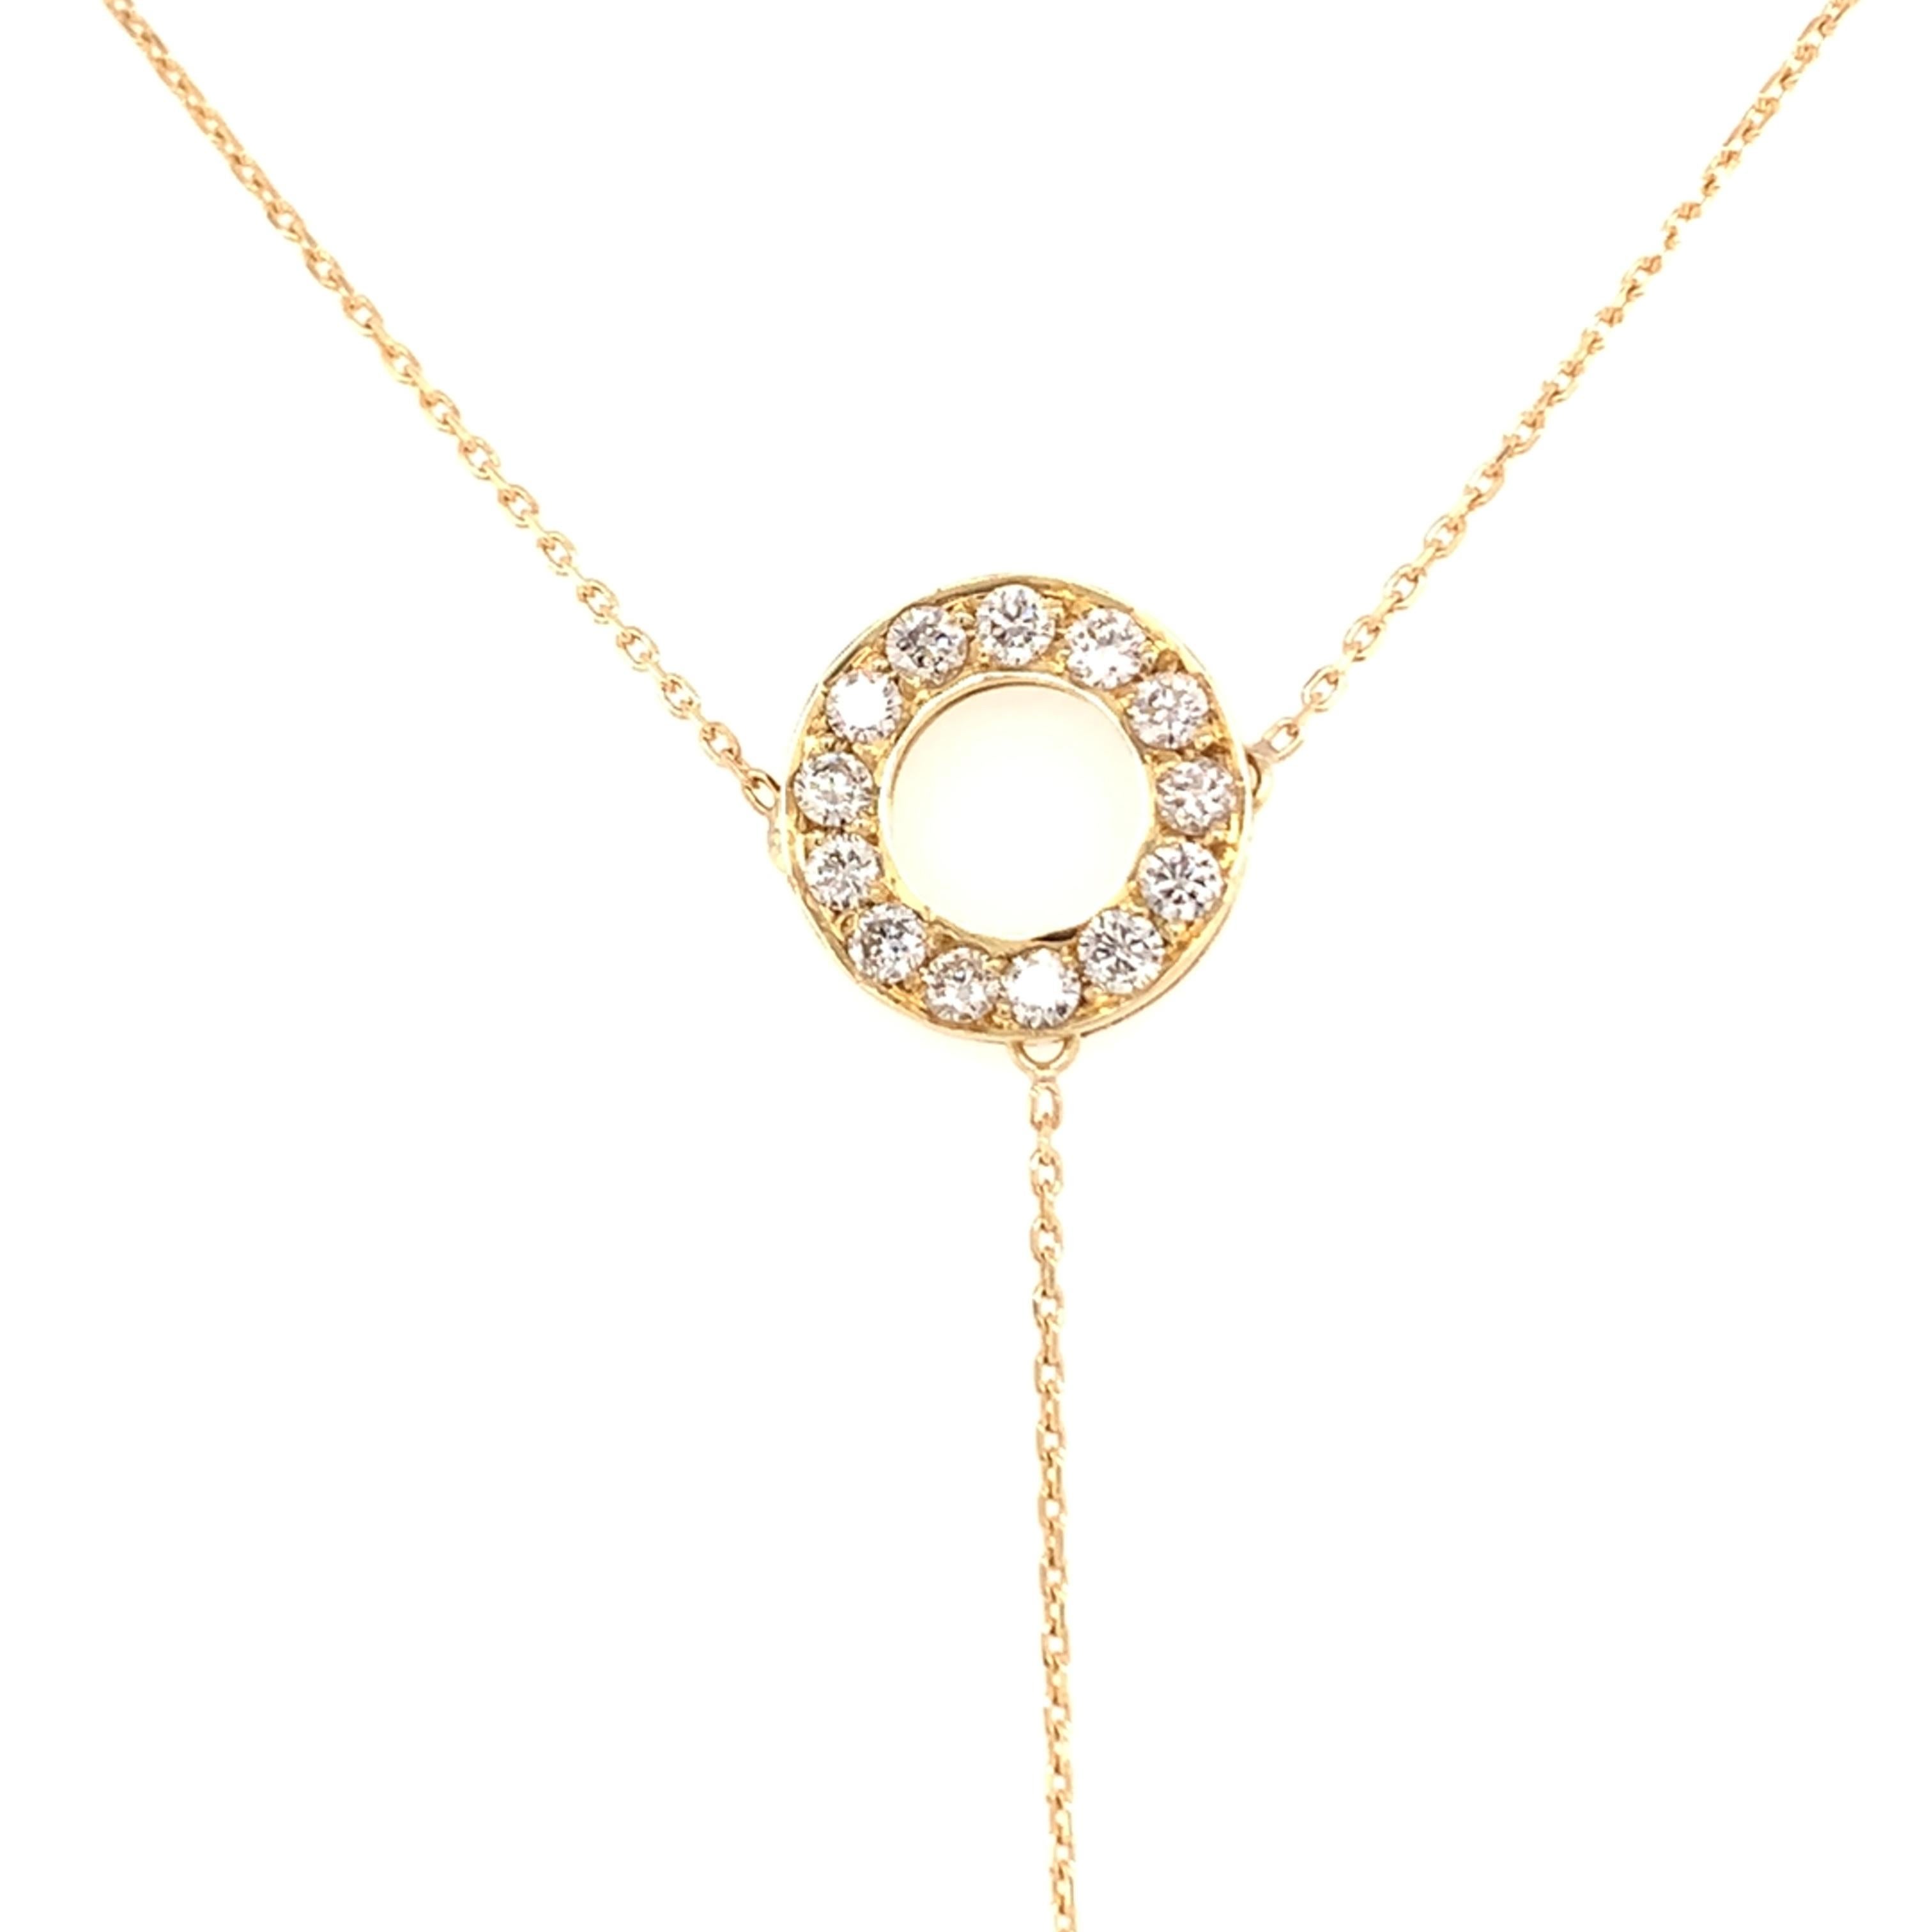 Diamond drop necklace made with real/natural brilliant cut diamonds. Diamond Weight: 0.63 carats. Diamond Quantity: 14 round diamonds. Mounted on 18kt yellow gold adjustable chain. 